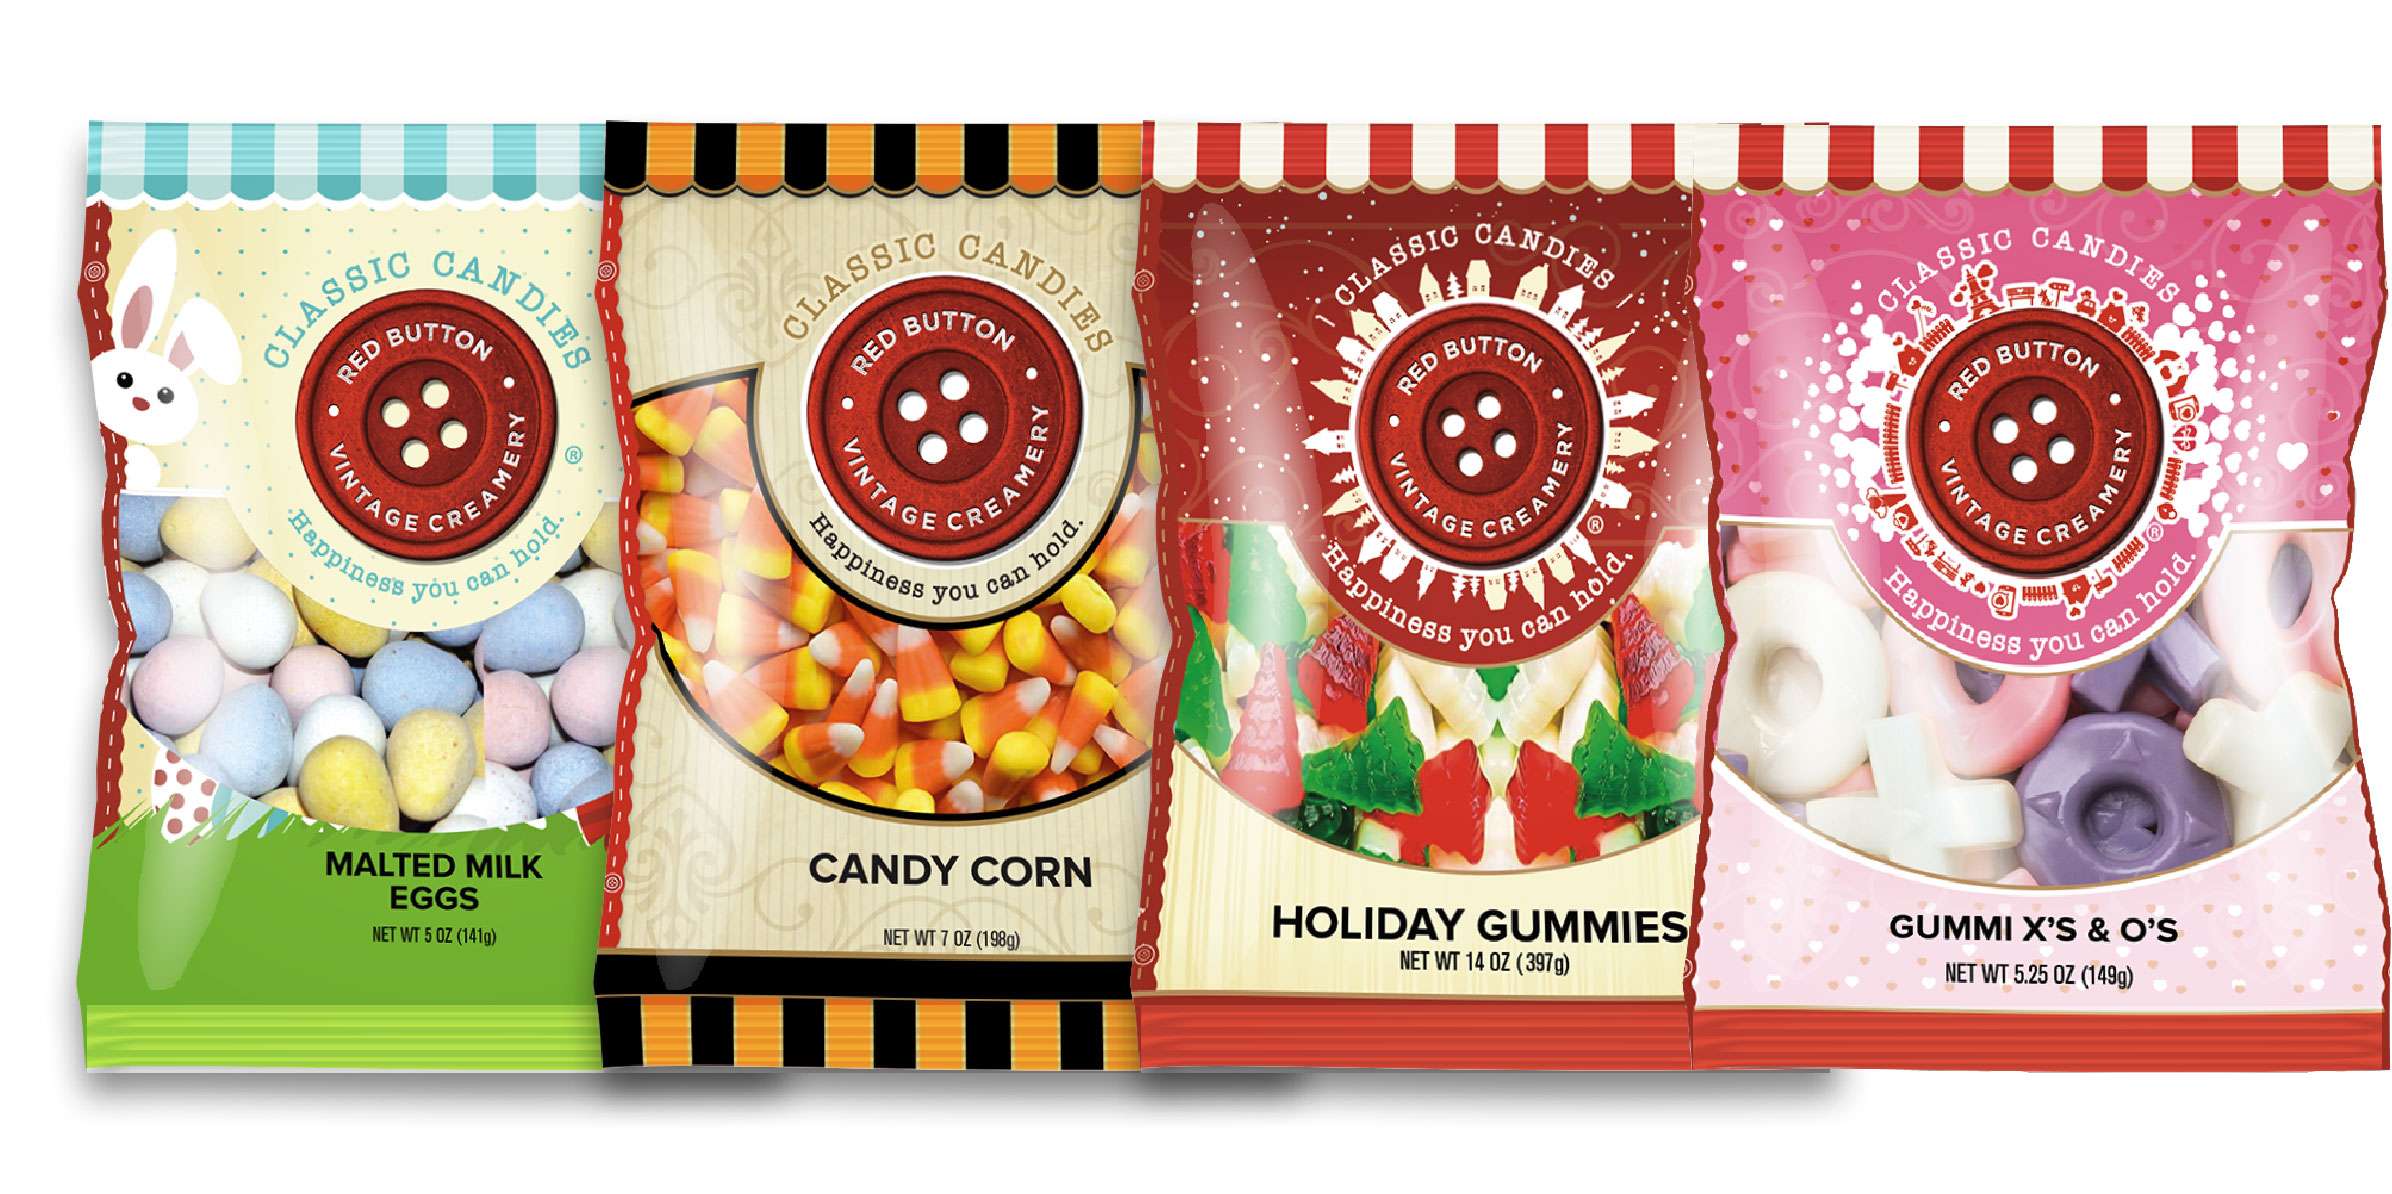 New Product Alert: Red Button Vintage Creamery Seasonal Candies ...